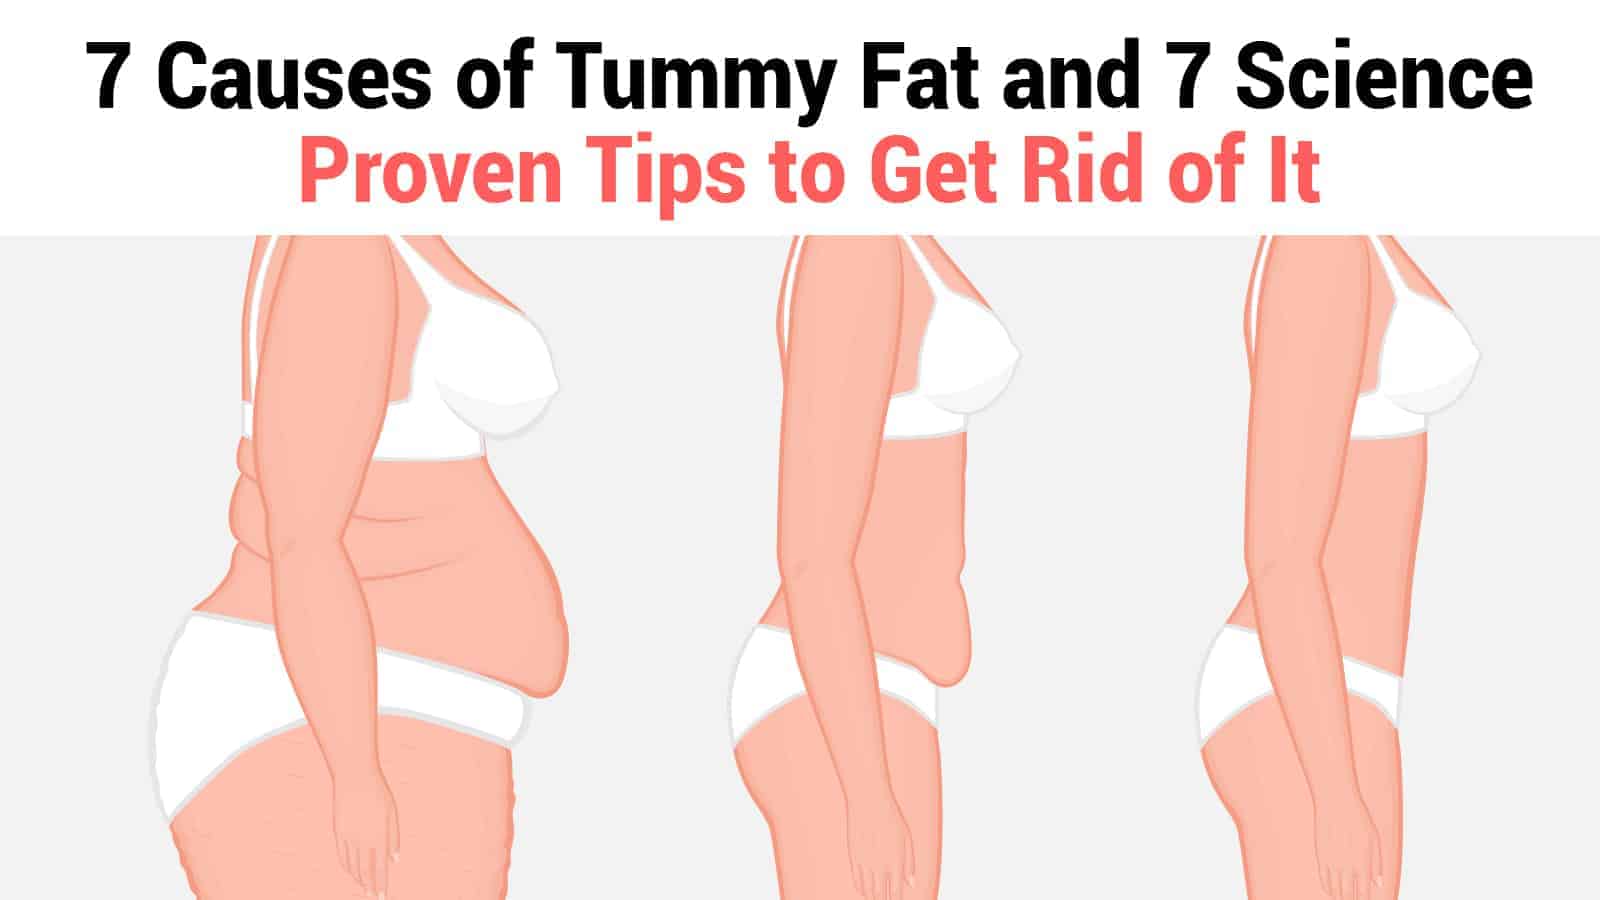 7 Causes of Tummy Fat and 7 Science Proven Tips to Get Rid of It